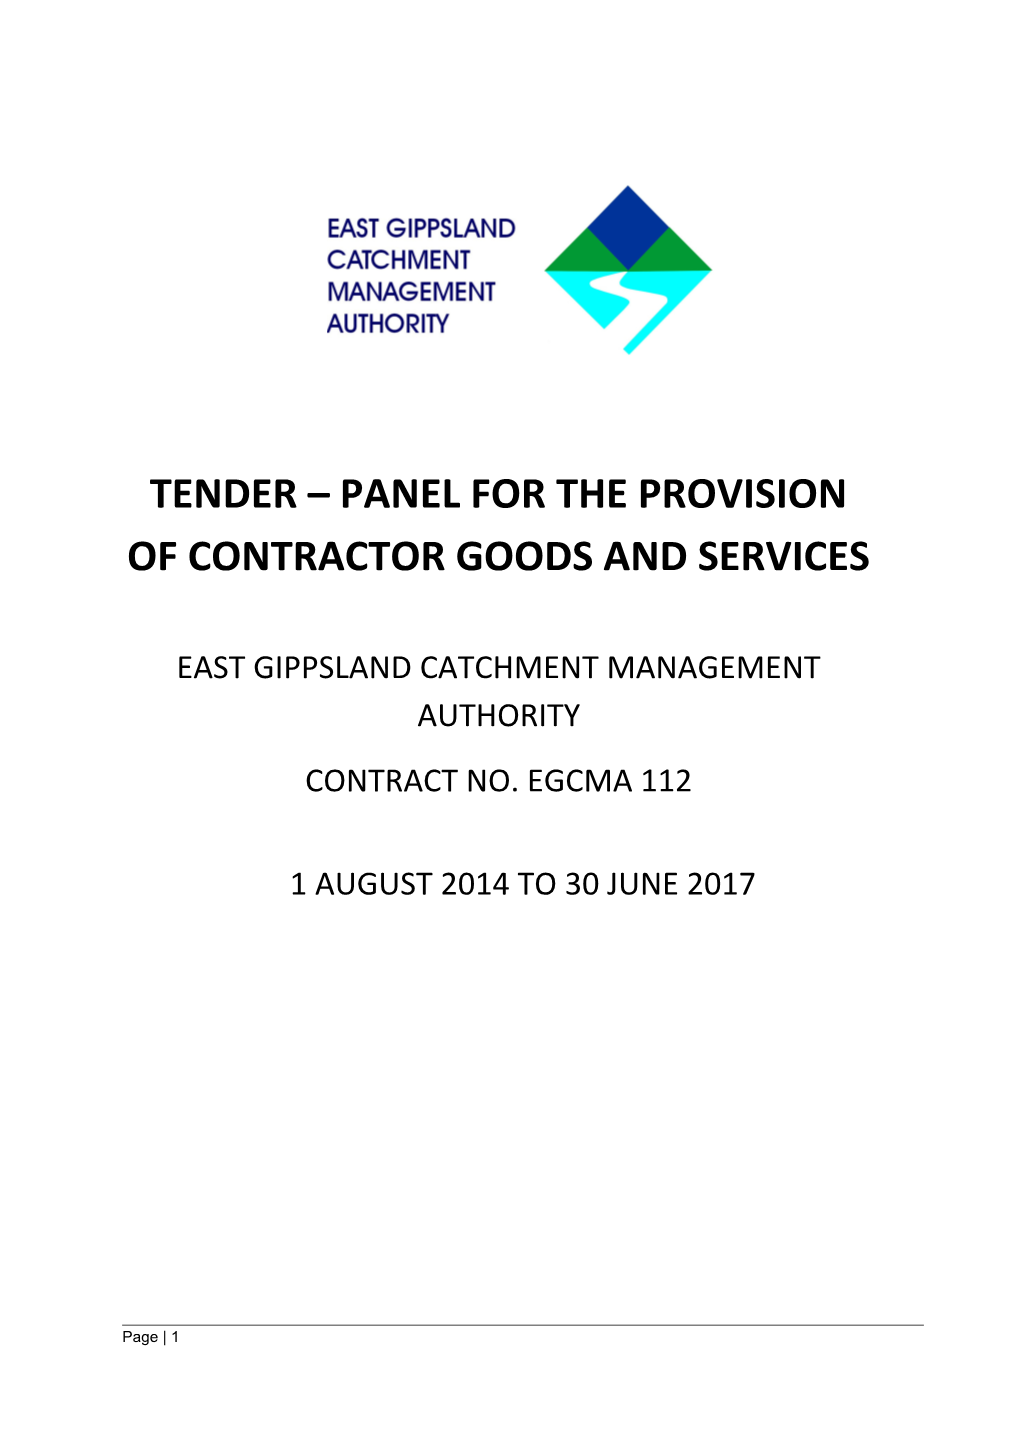 Tender Panel for the Provision of Contractorgoods and Services